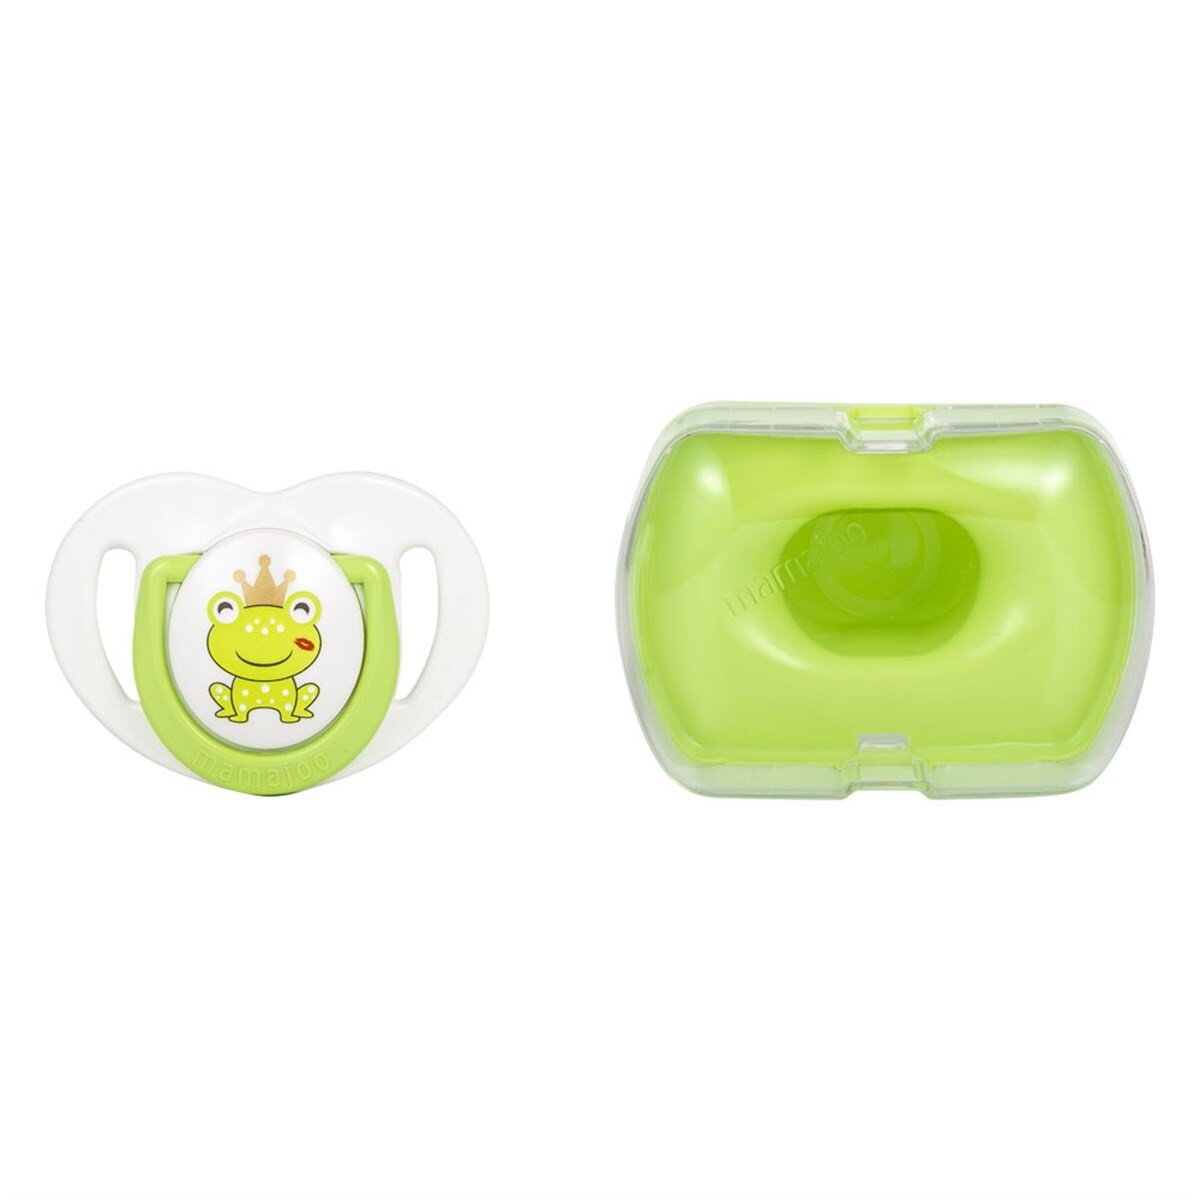 Mamajoo Silicone Orthodontic Soother & Storage Box